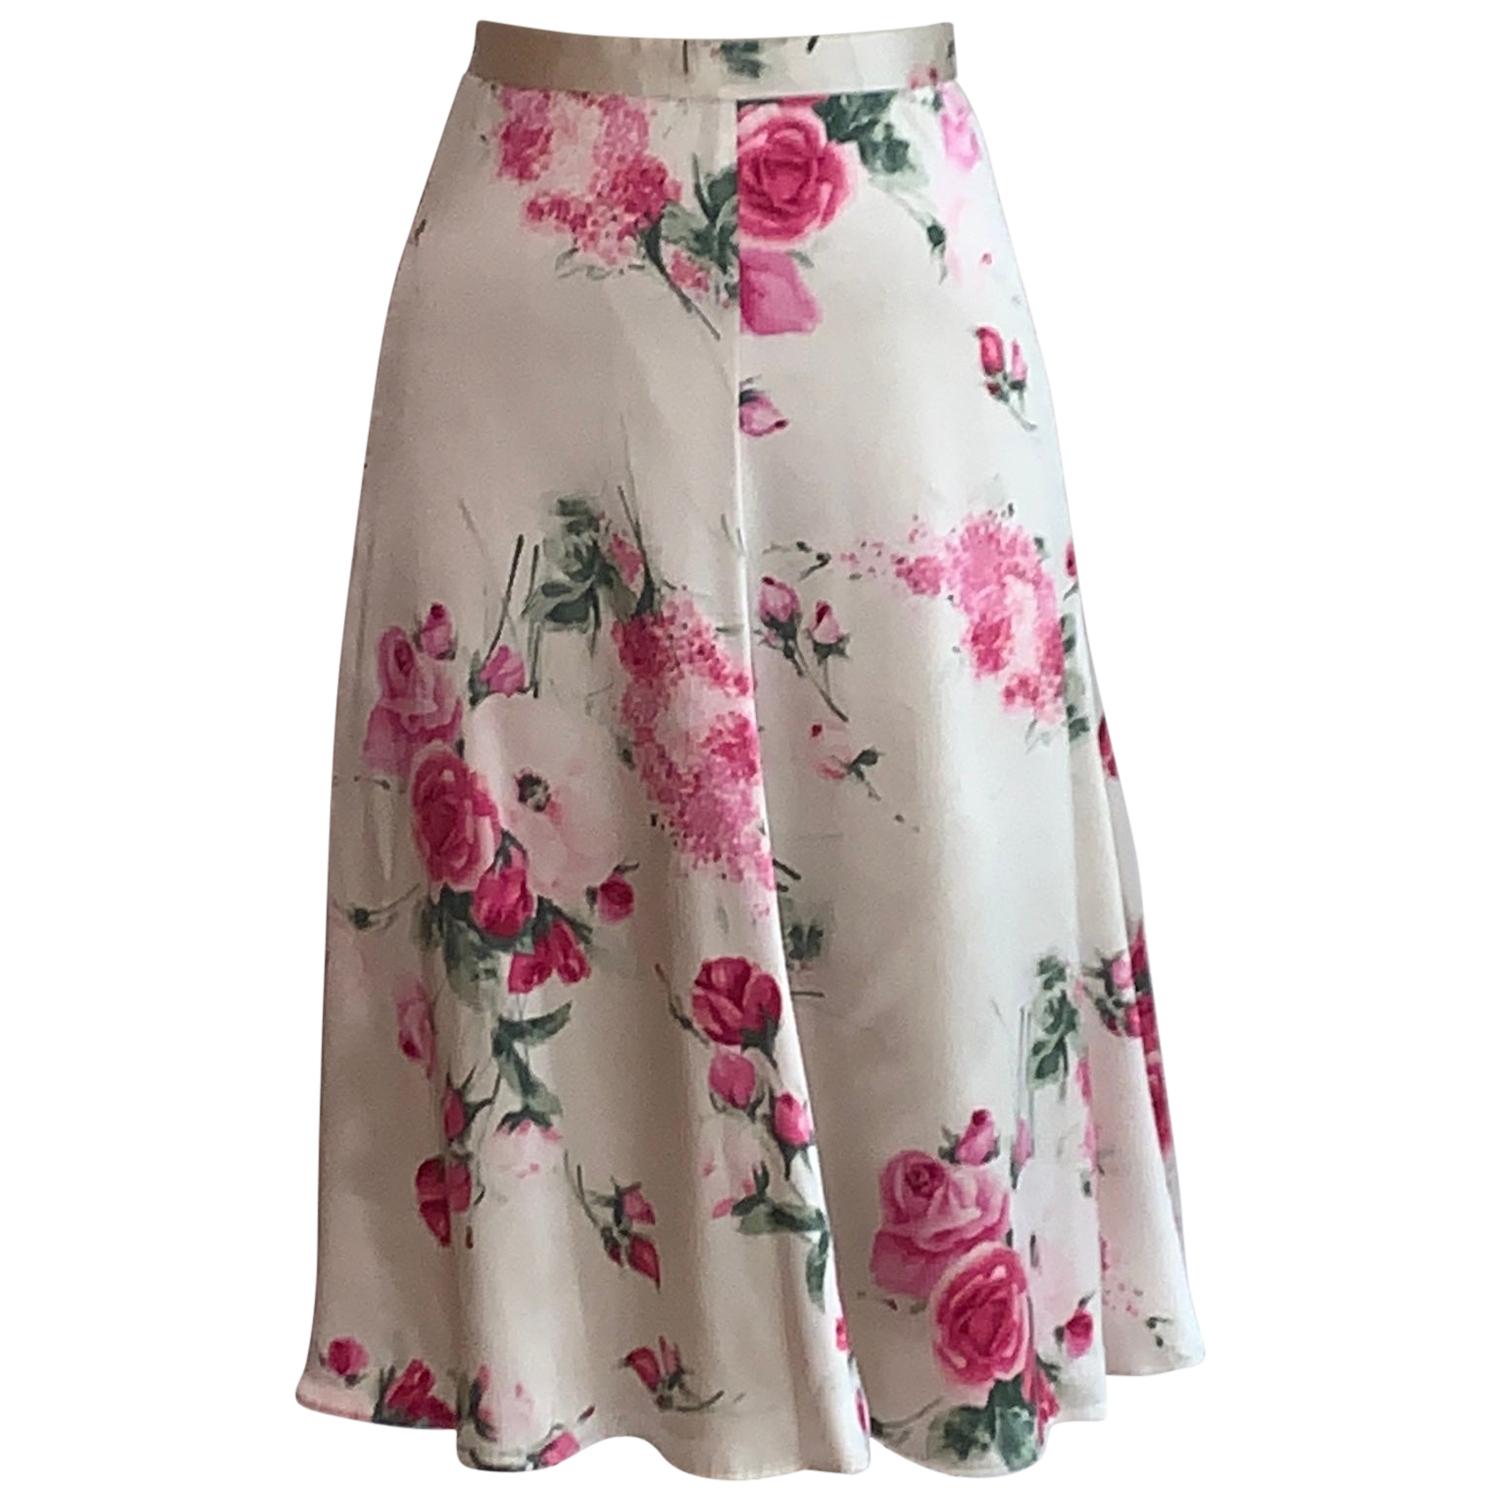 Dolce and Gabbana Rose Floral Print Silk Skirt Pink and Cream White